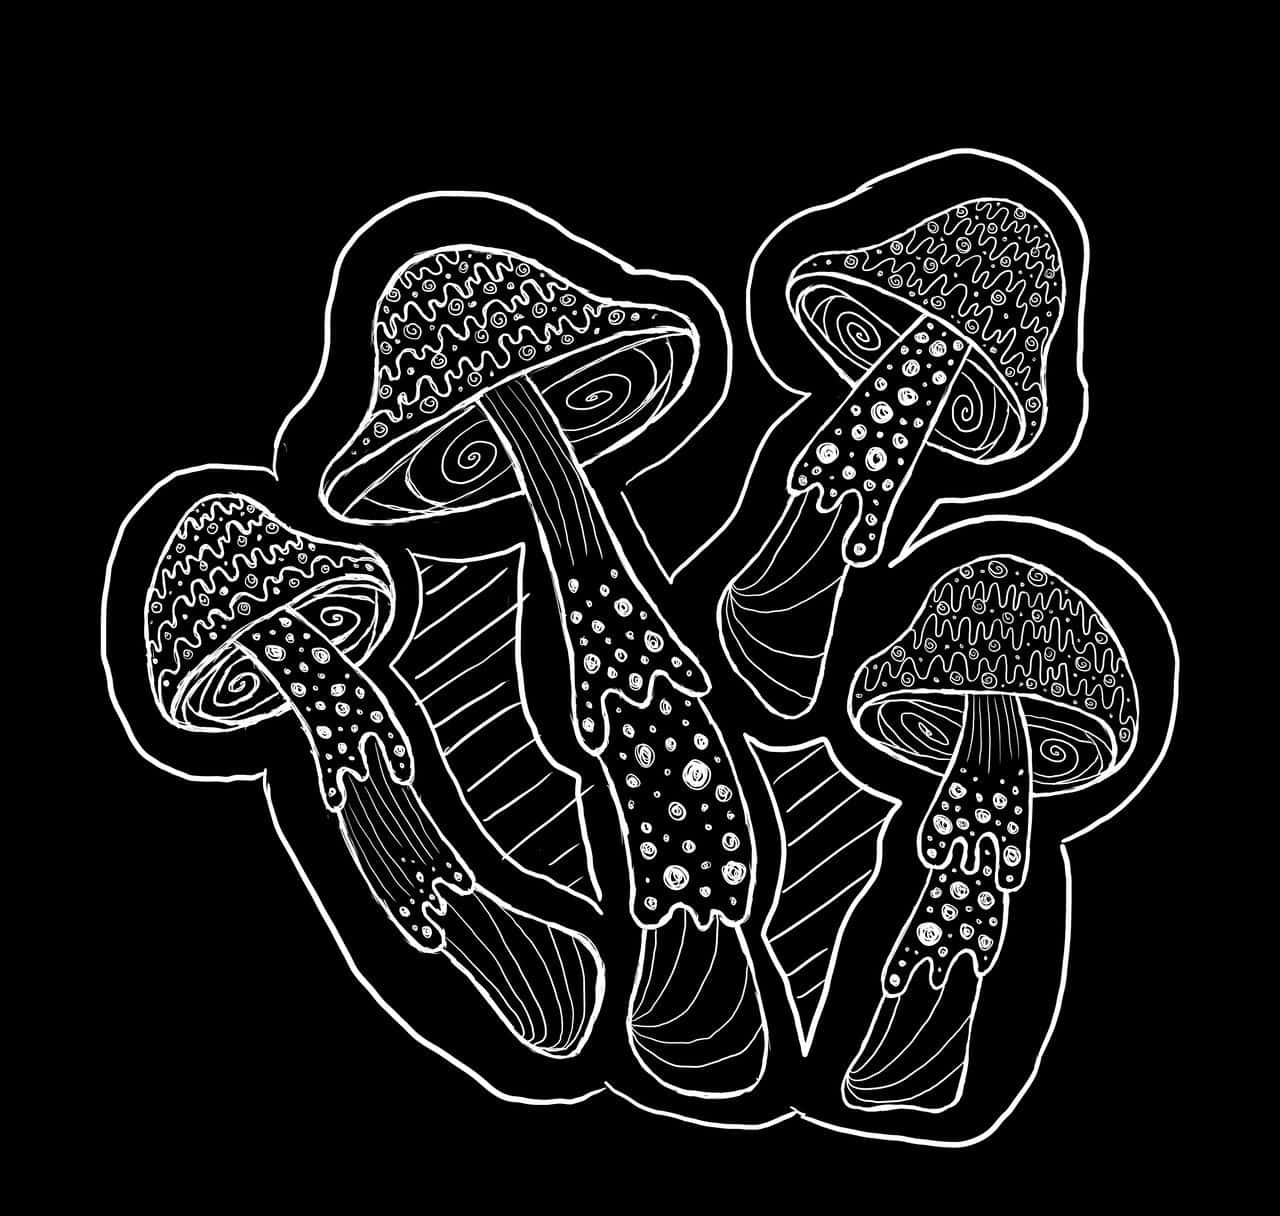 Get Lost In The Magical and Trippy World of Mushrooms